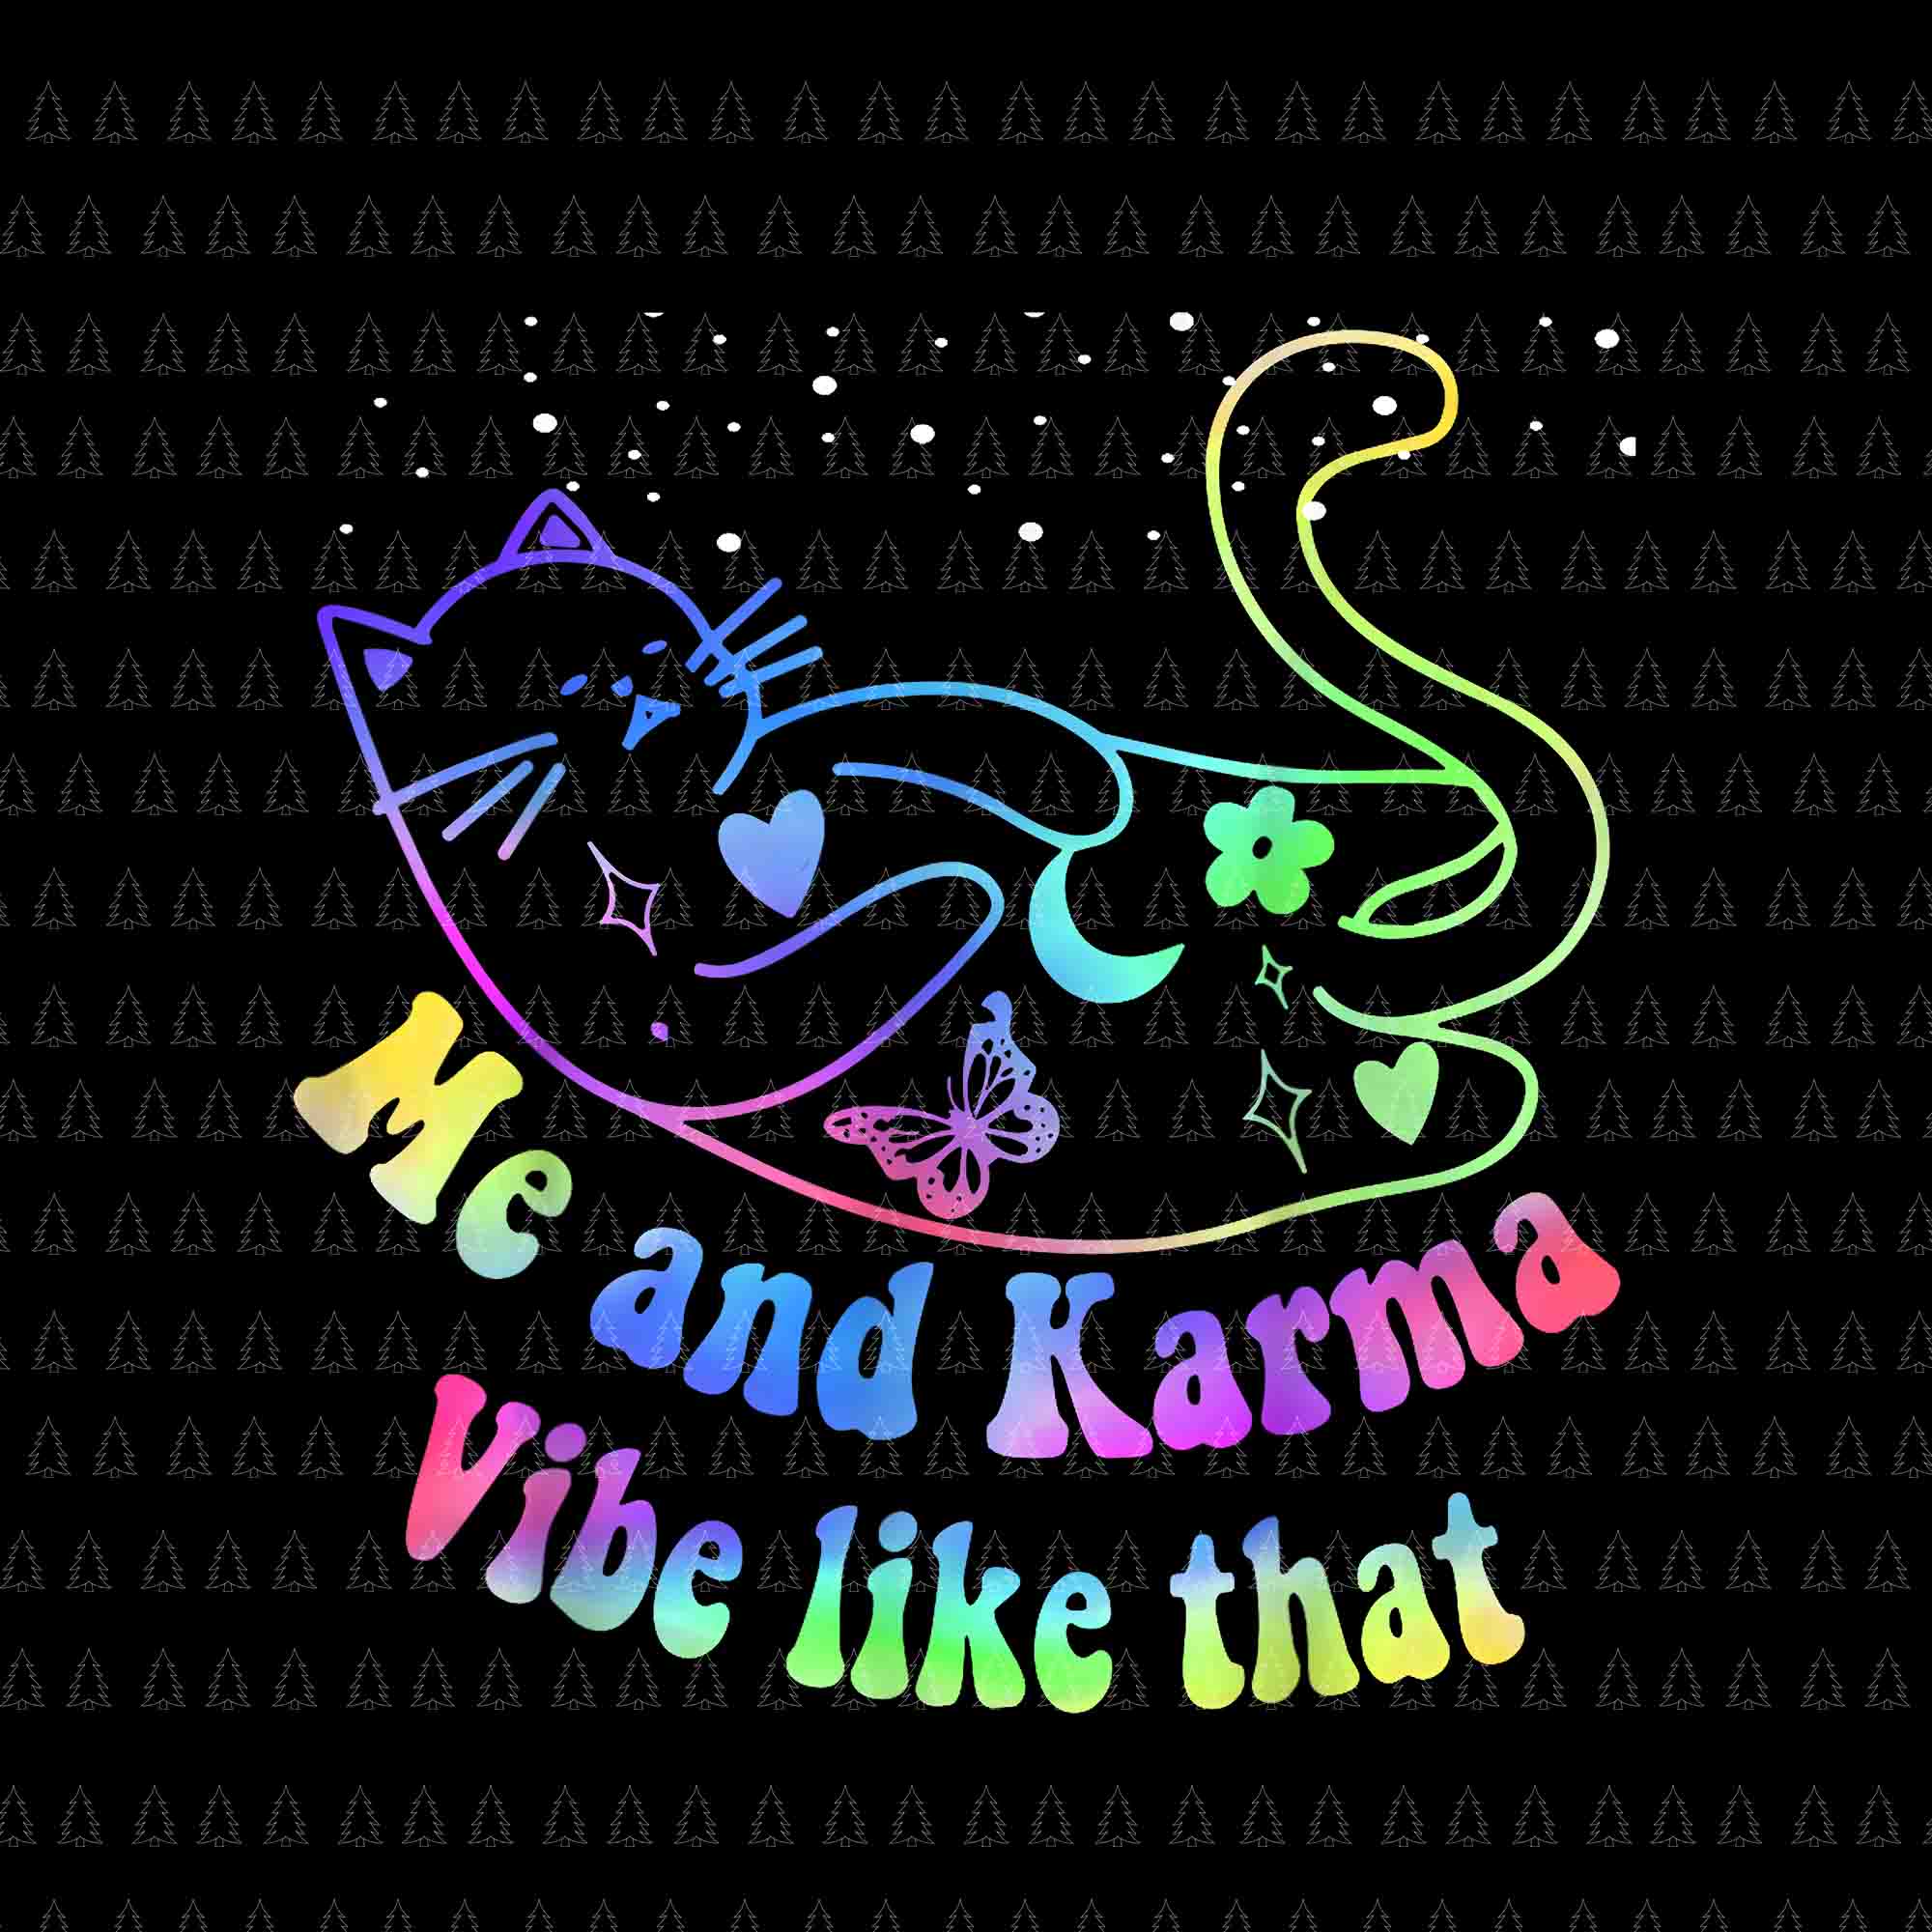 Me And Karma Vibe Like That Png, Lazy Cat Png, Funny Cat Png, Cat Color Png